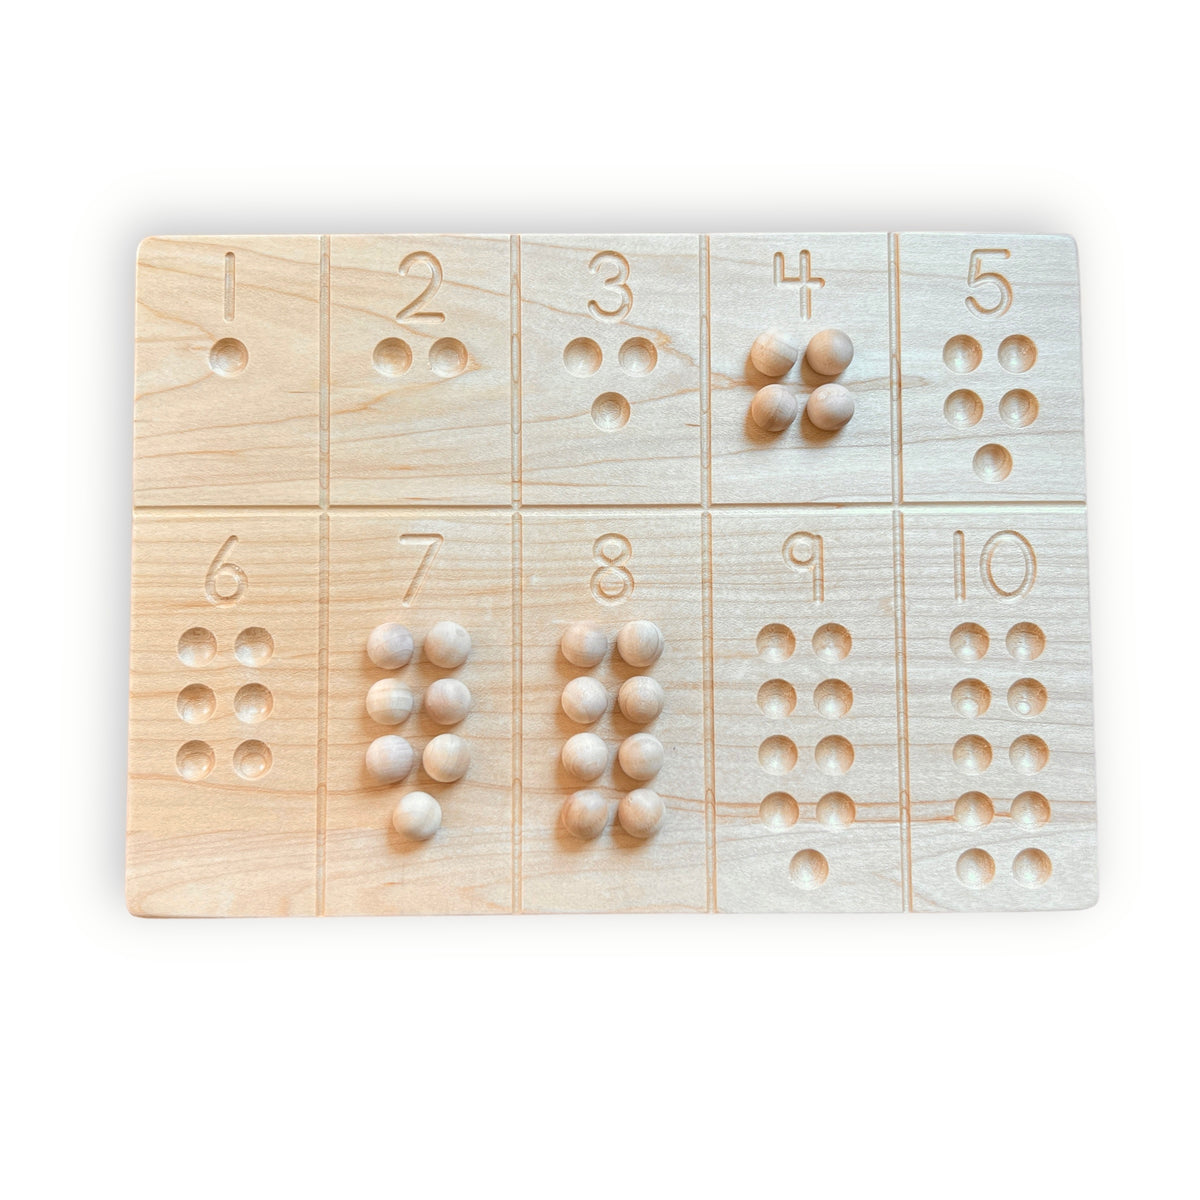 1-10 Counting Board